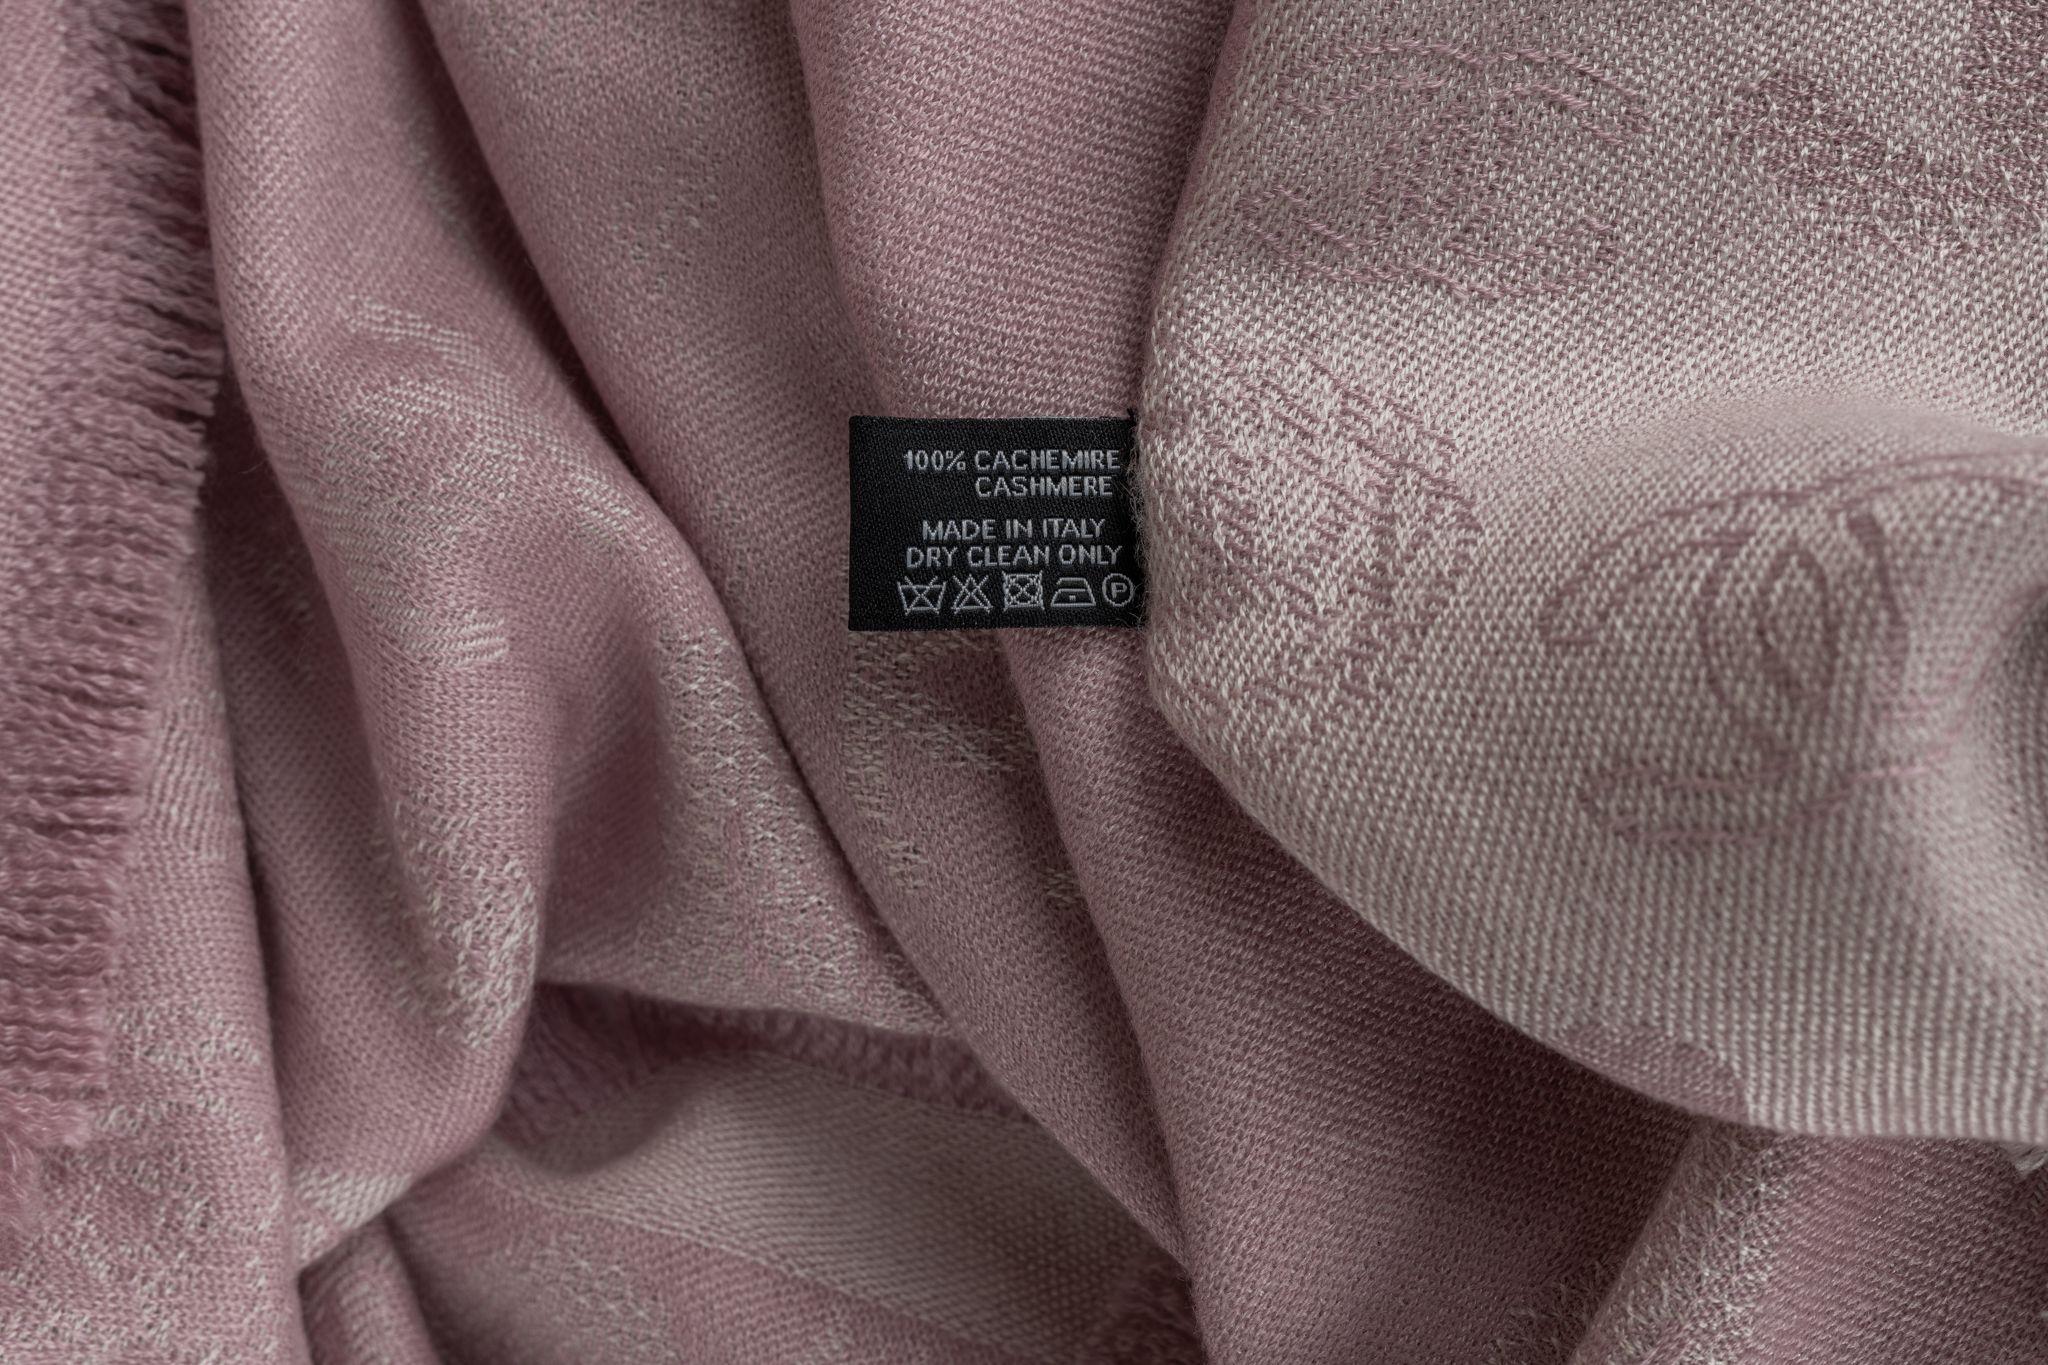 Chanel Cashmere Shawl in pink. The pattern features hearts and small CC logos. The item is in new condition.